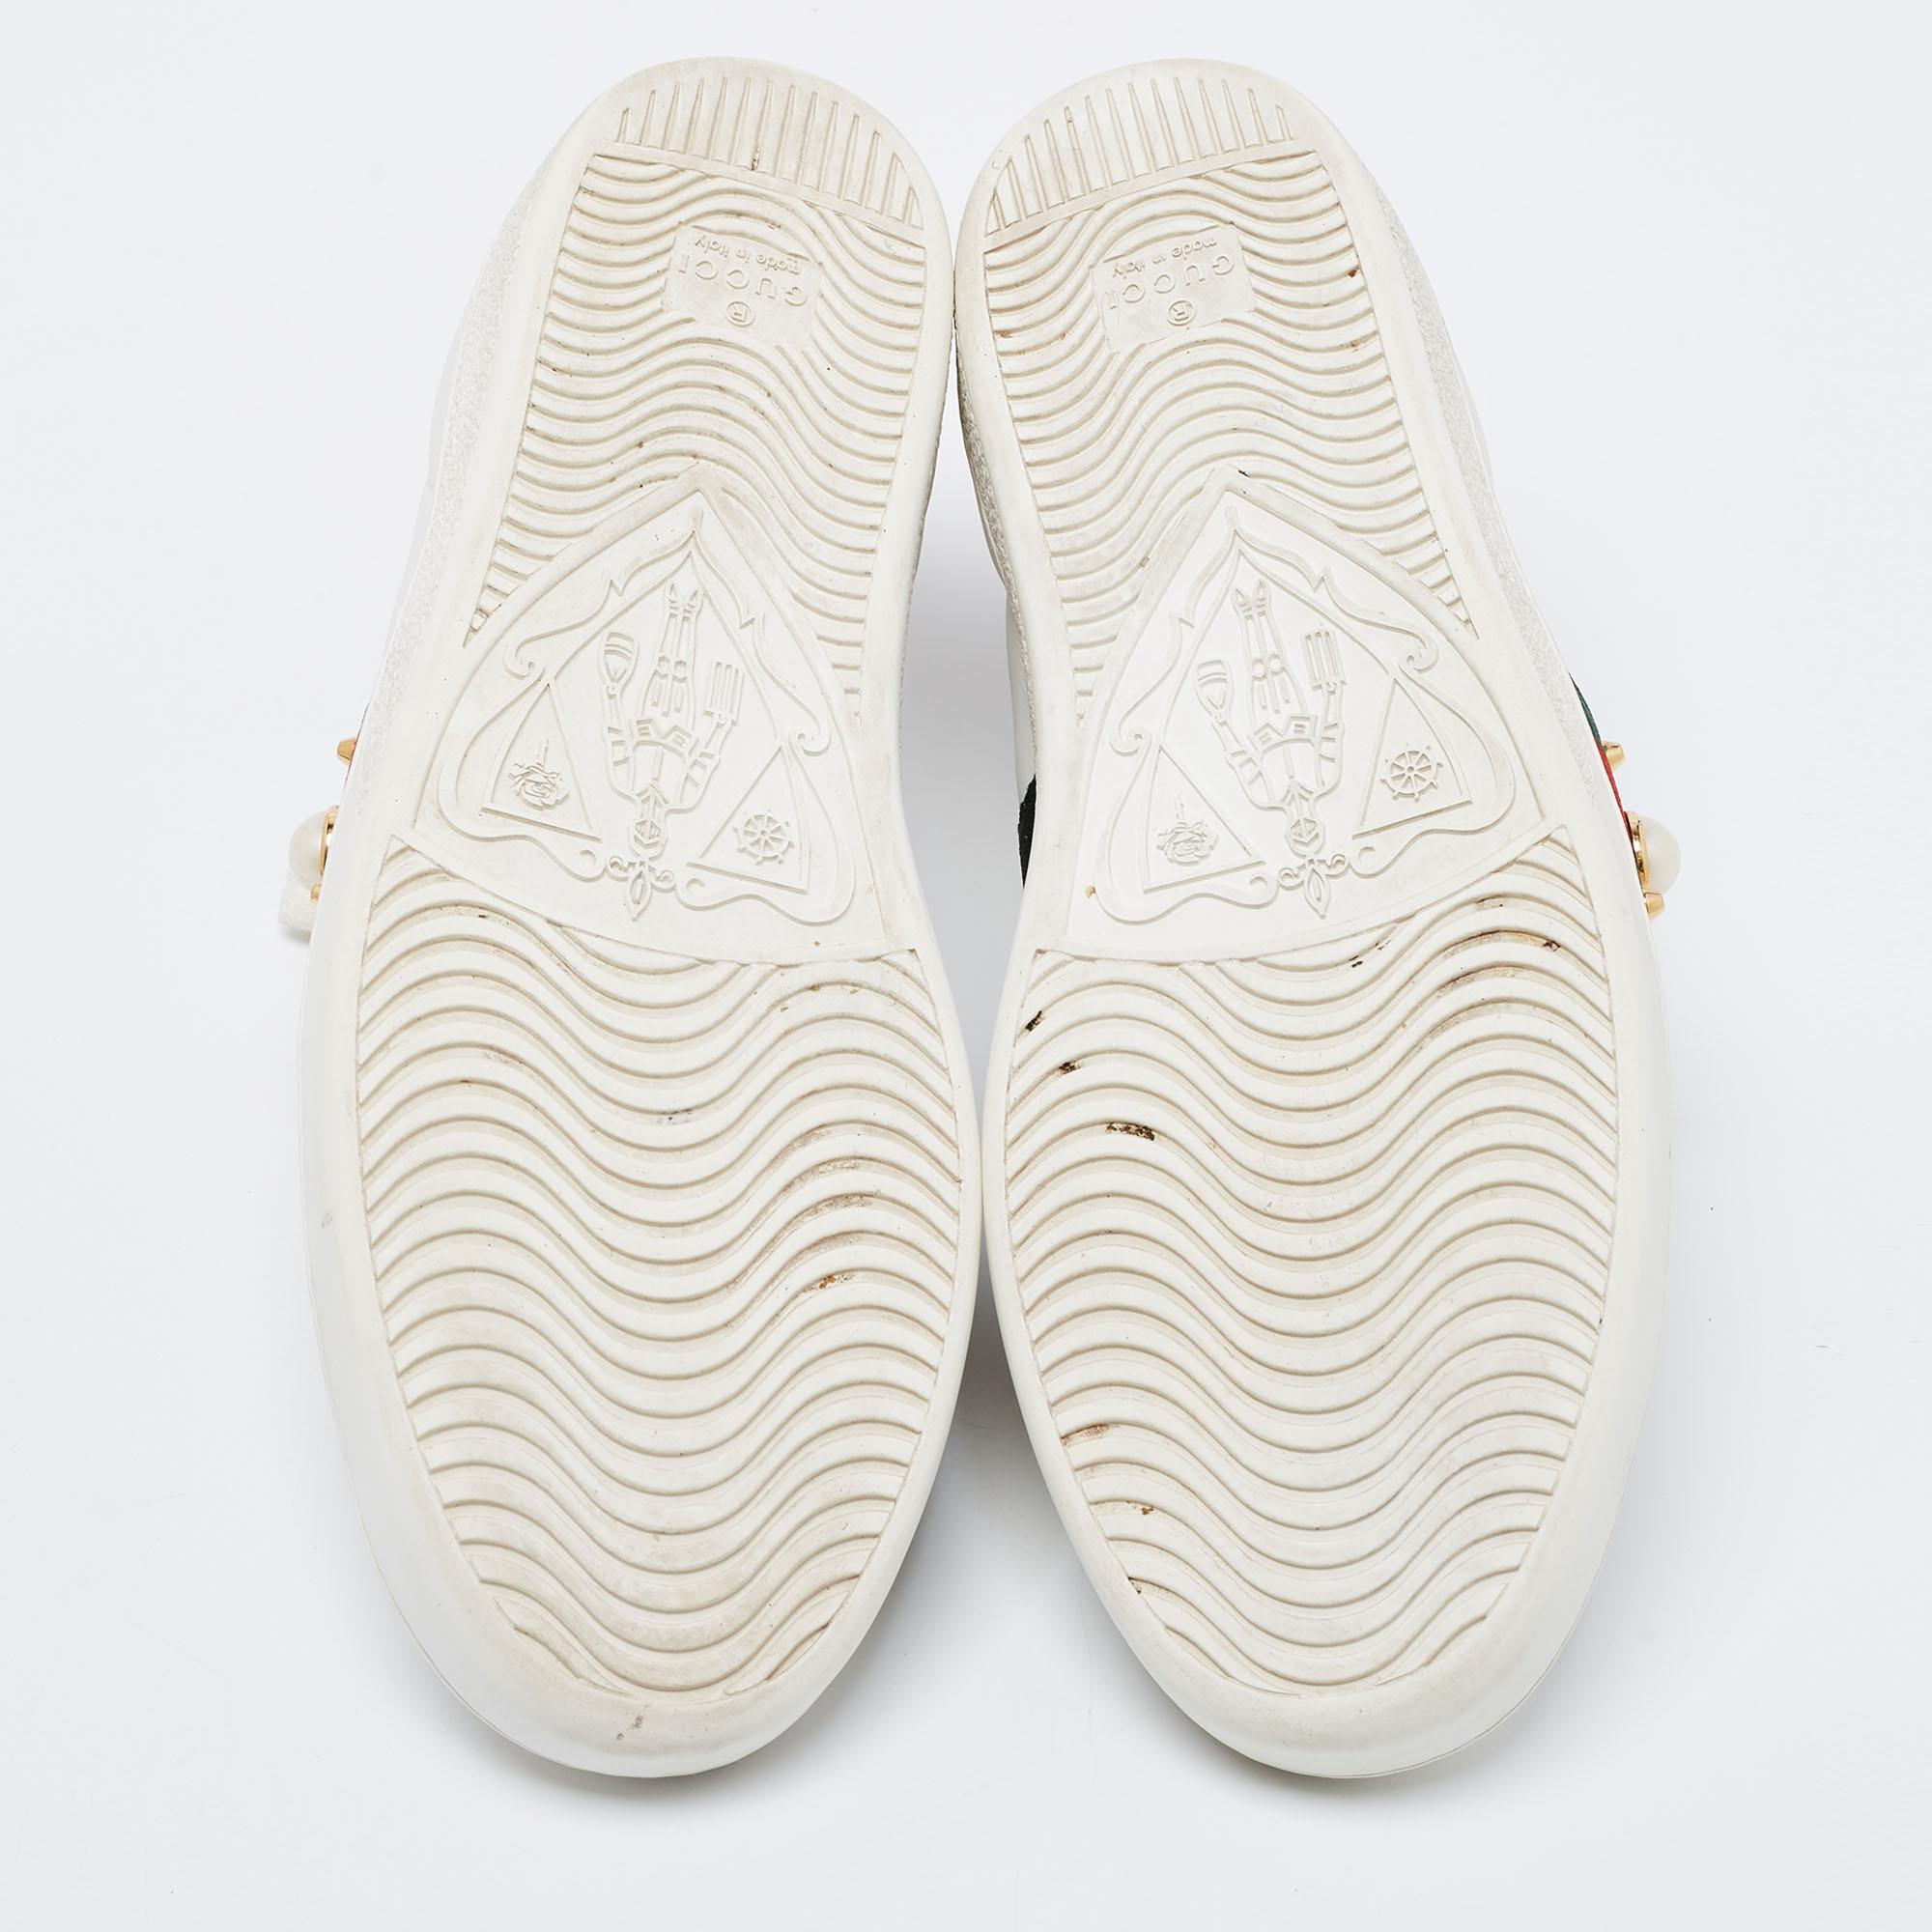 Gucci White Leather Faux Pearl Embellished Ace Sneakers Size 39 4